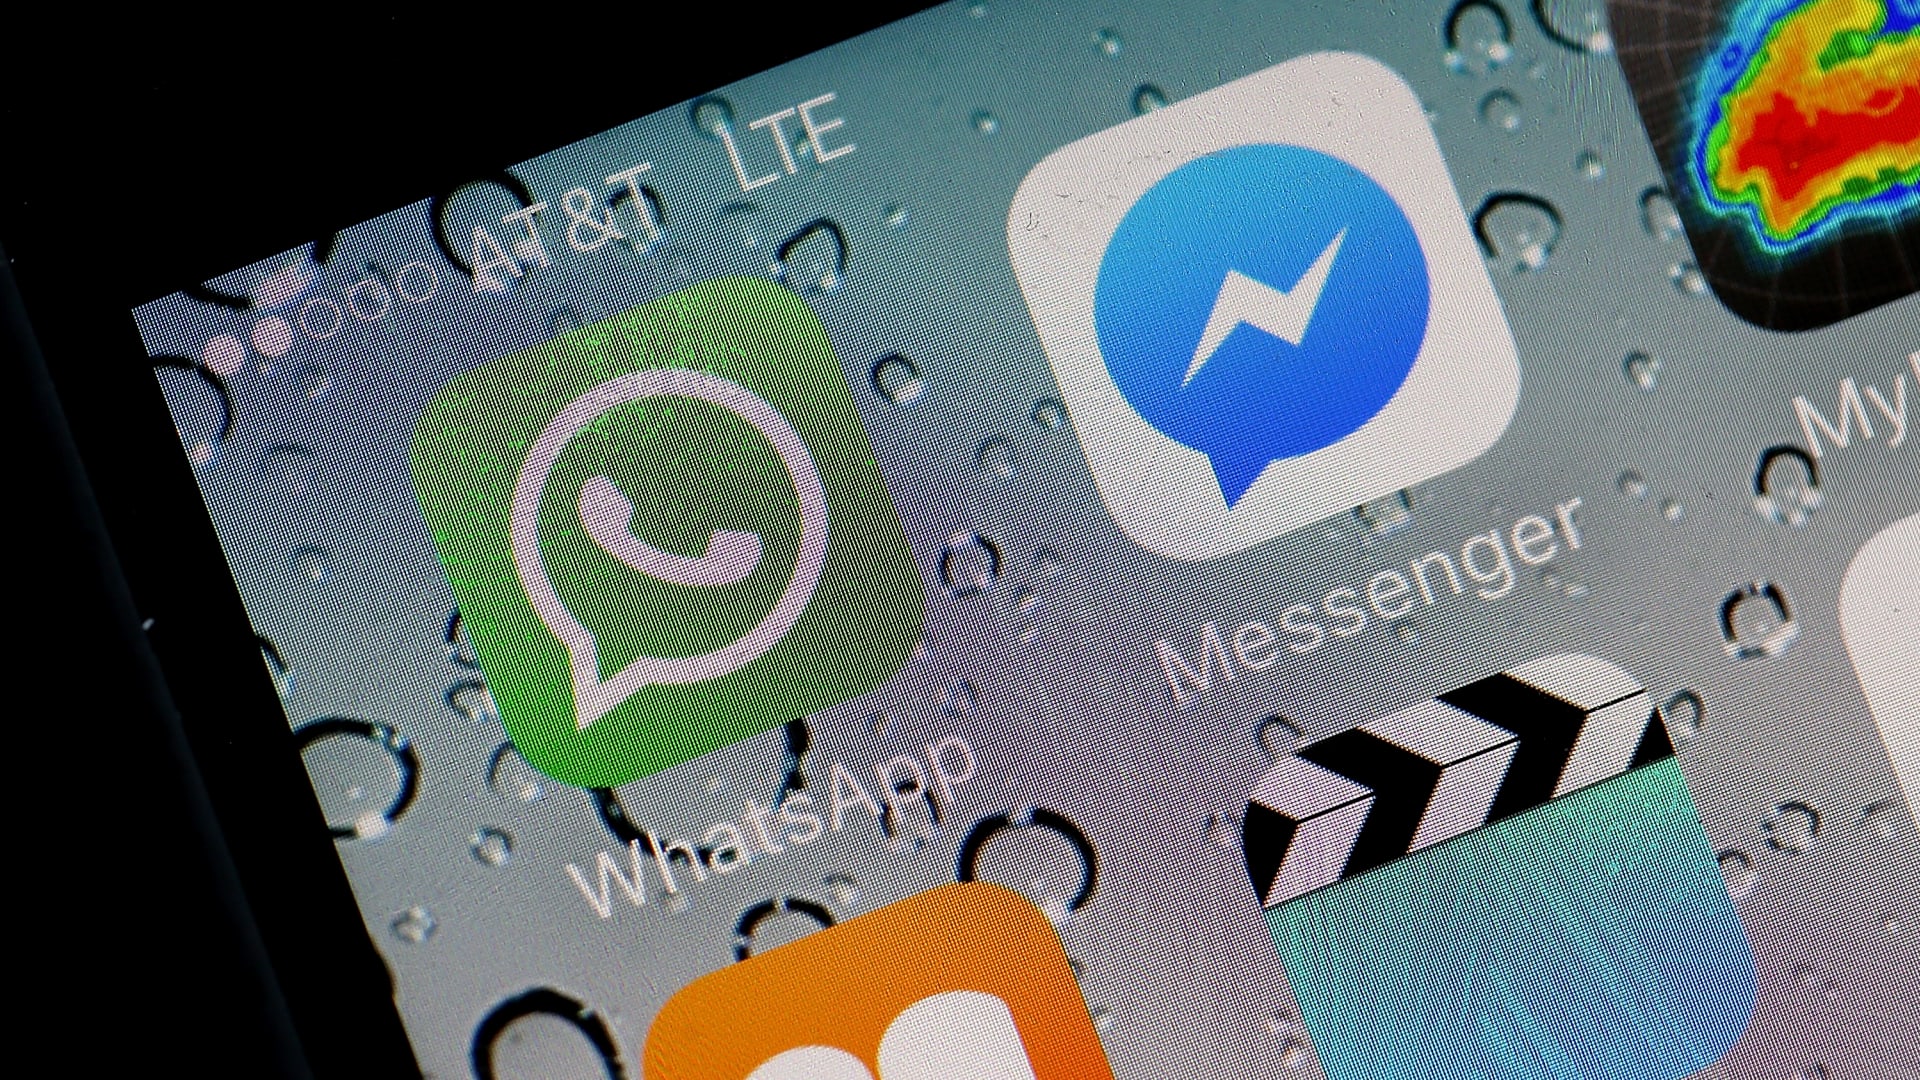 Europe looks to crack open data encryption on messaging services like WhatsApp